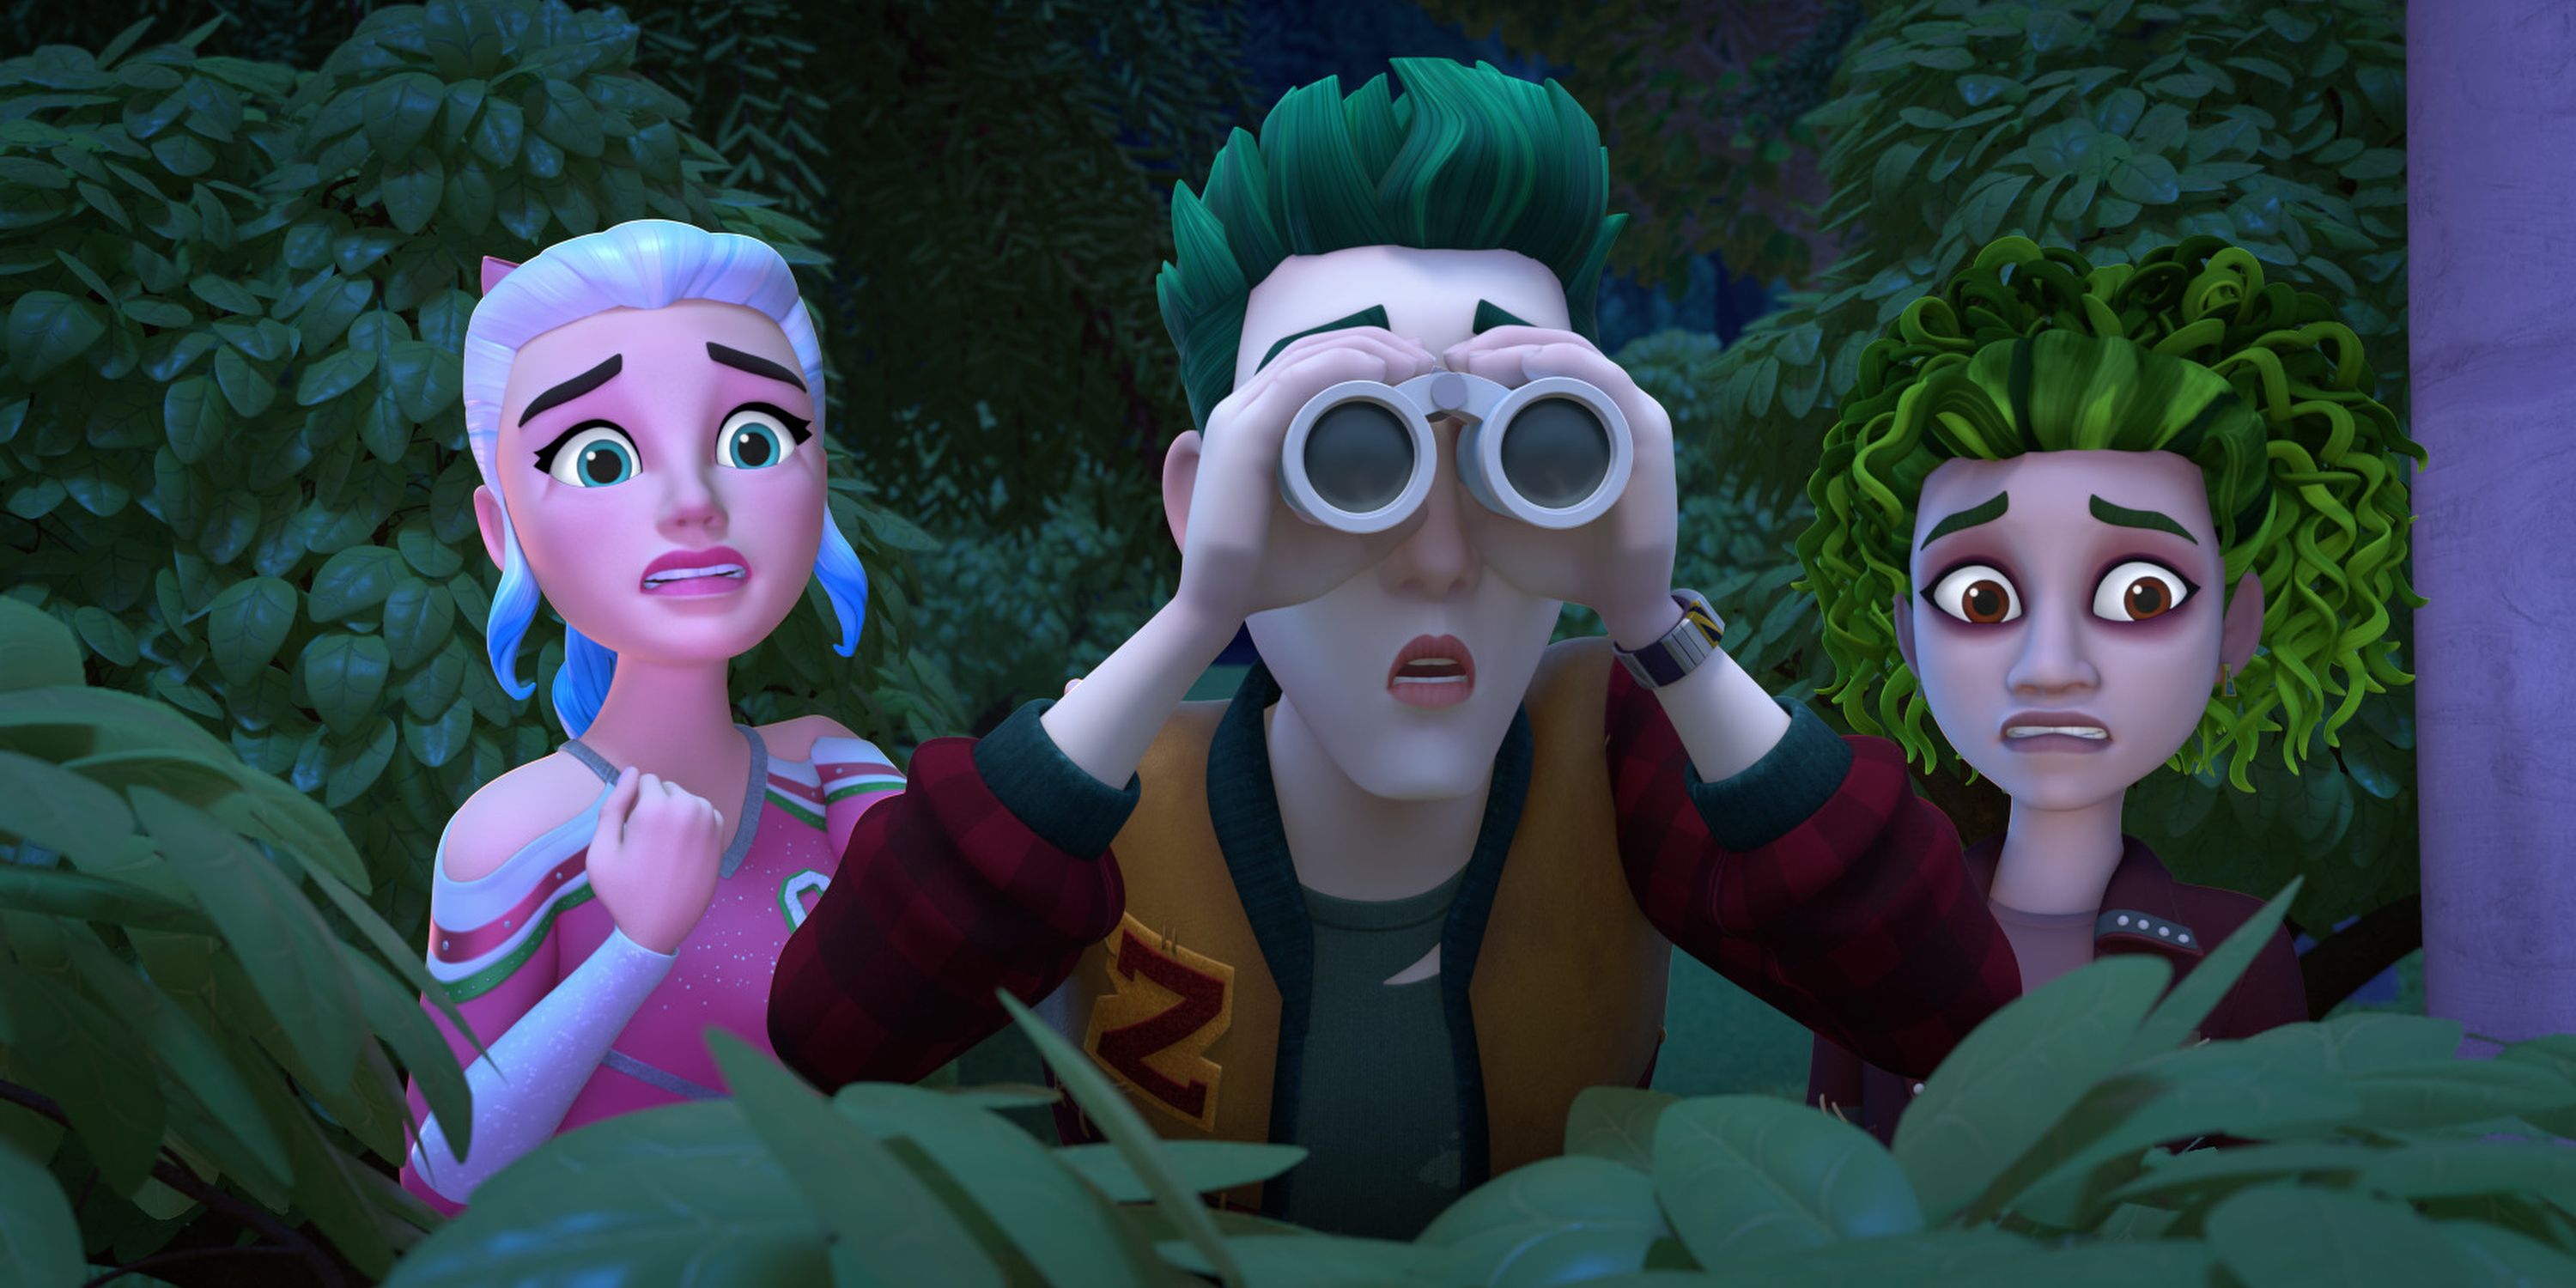 Addison, Zed, and Eliza spying in ZOMBIES: The Re-Animated Series.